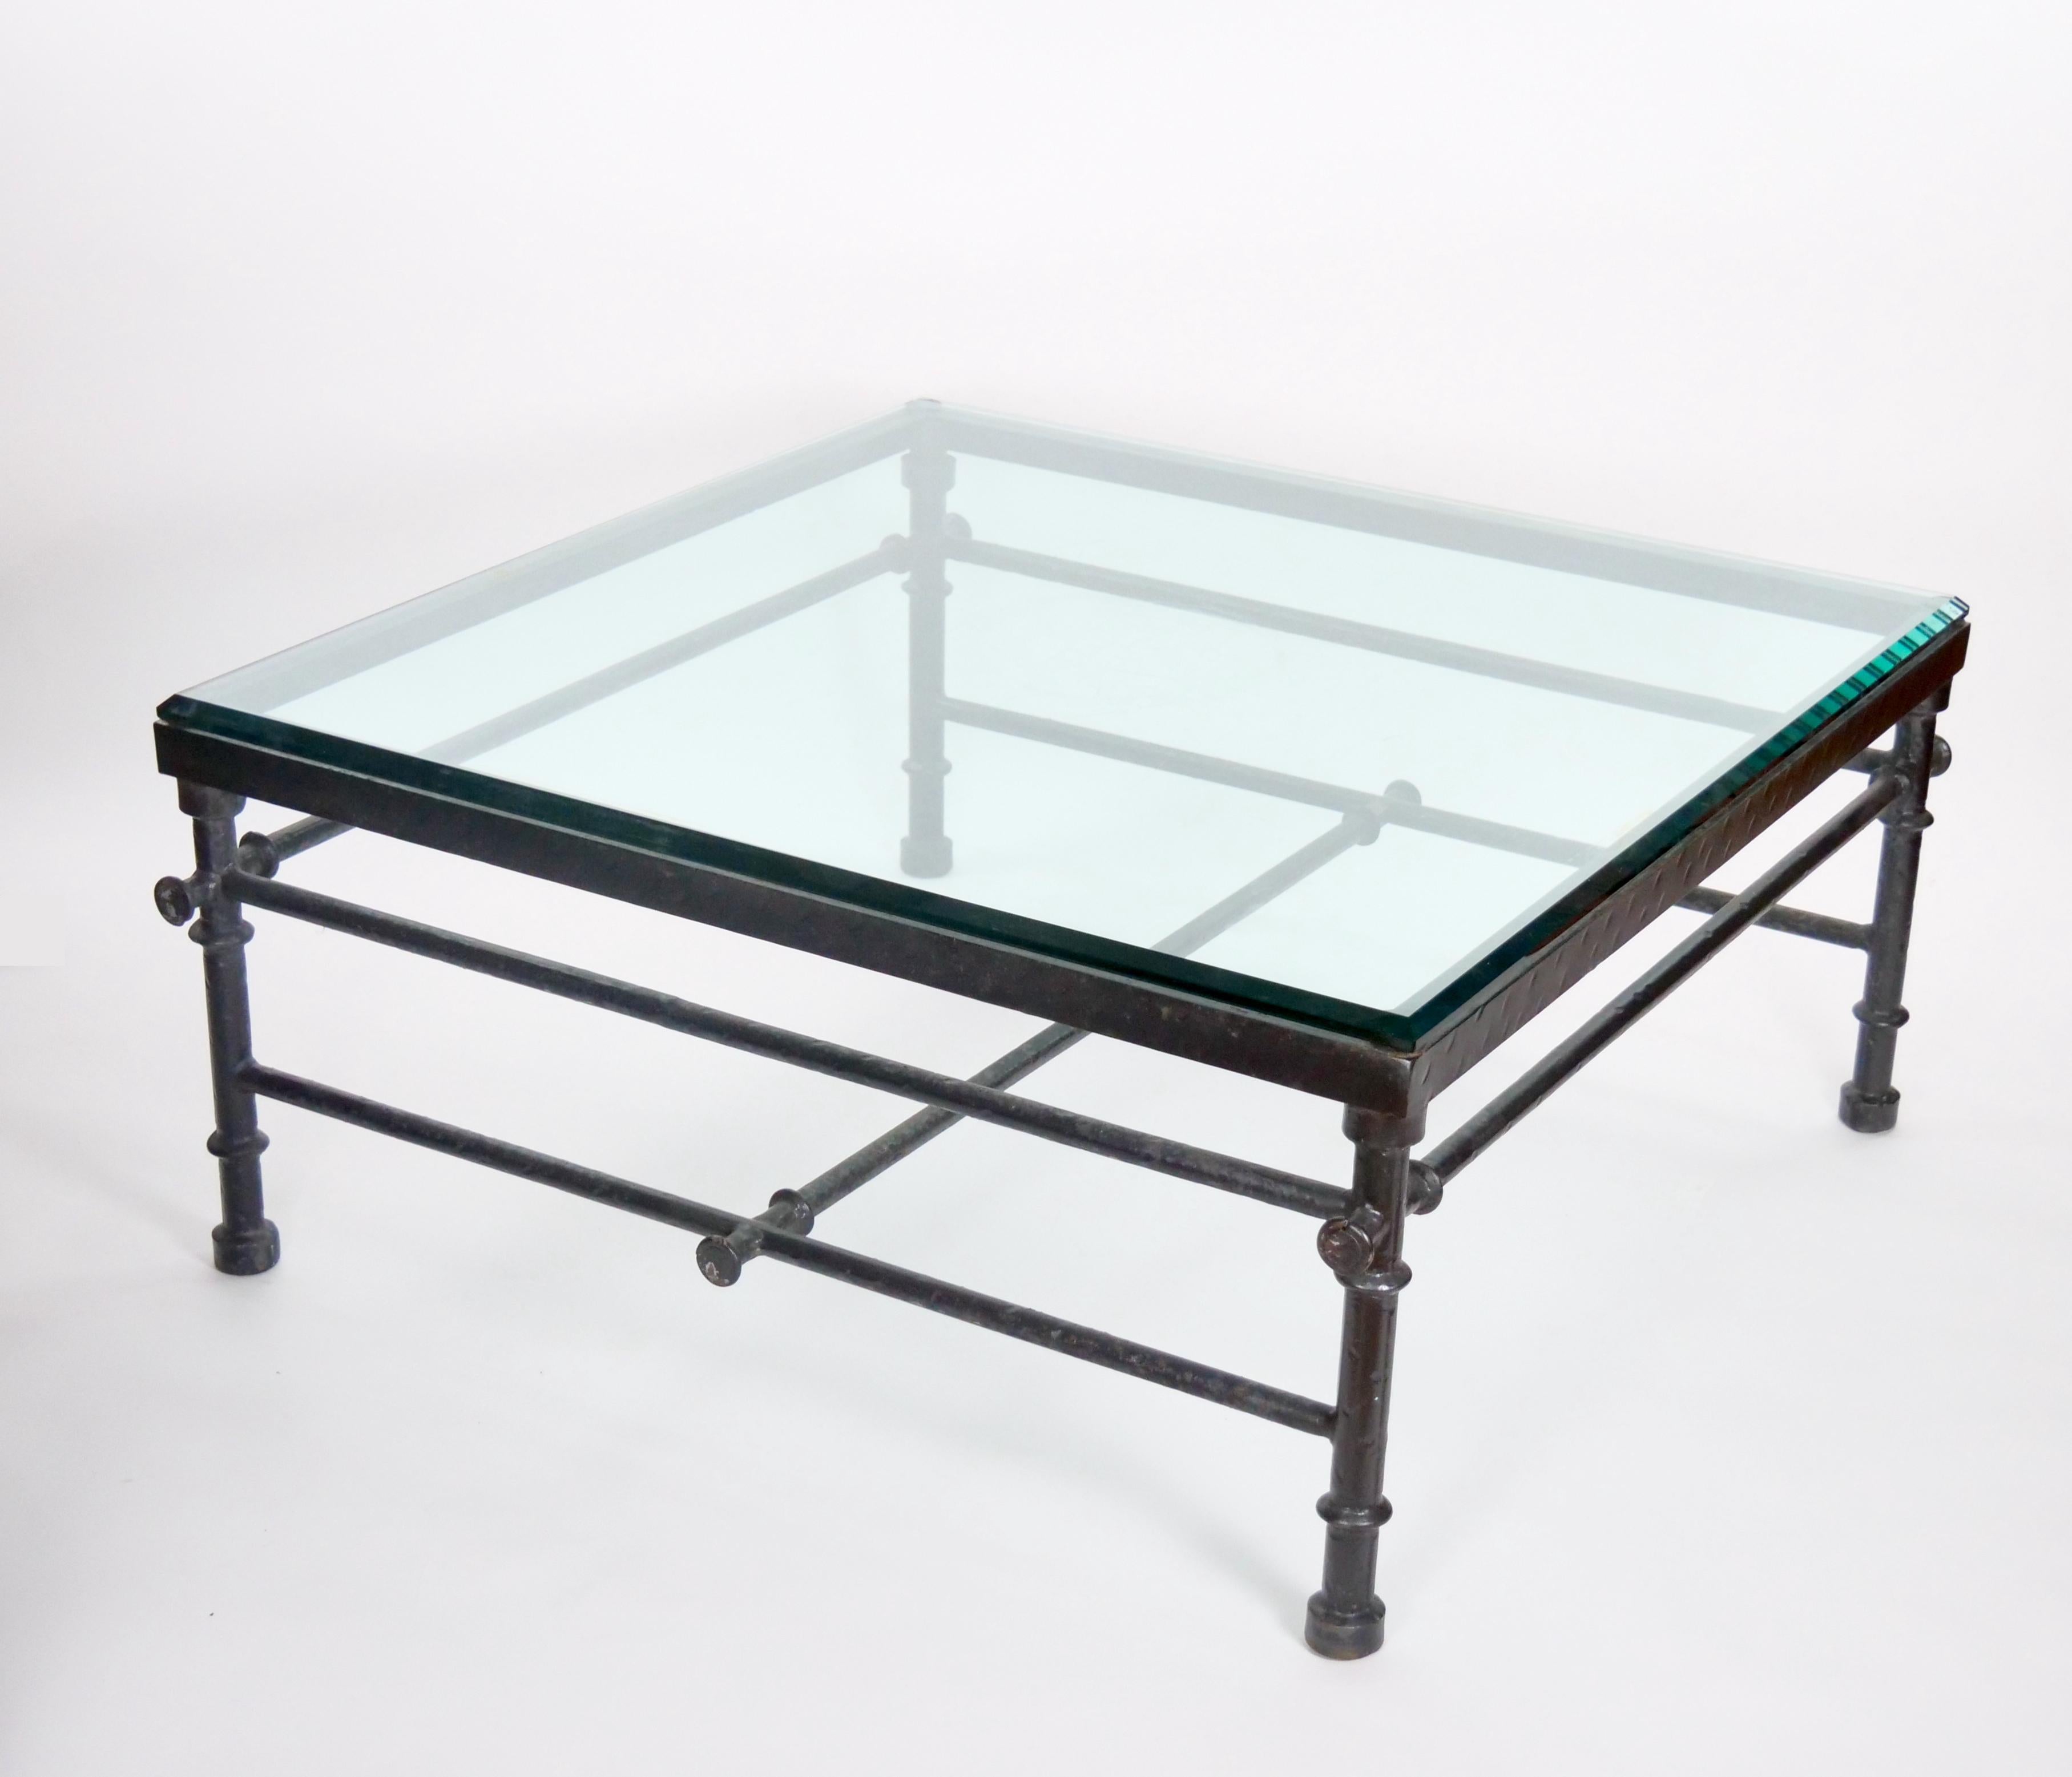 Presenting a captivating 19th Century coffee table, featuring a substantial hand-painted wrought iron frame with an inset glass top. This unique piece exudes timeless elegance, showcasing intricate craftsmanship and enduring design from a bygone